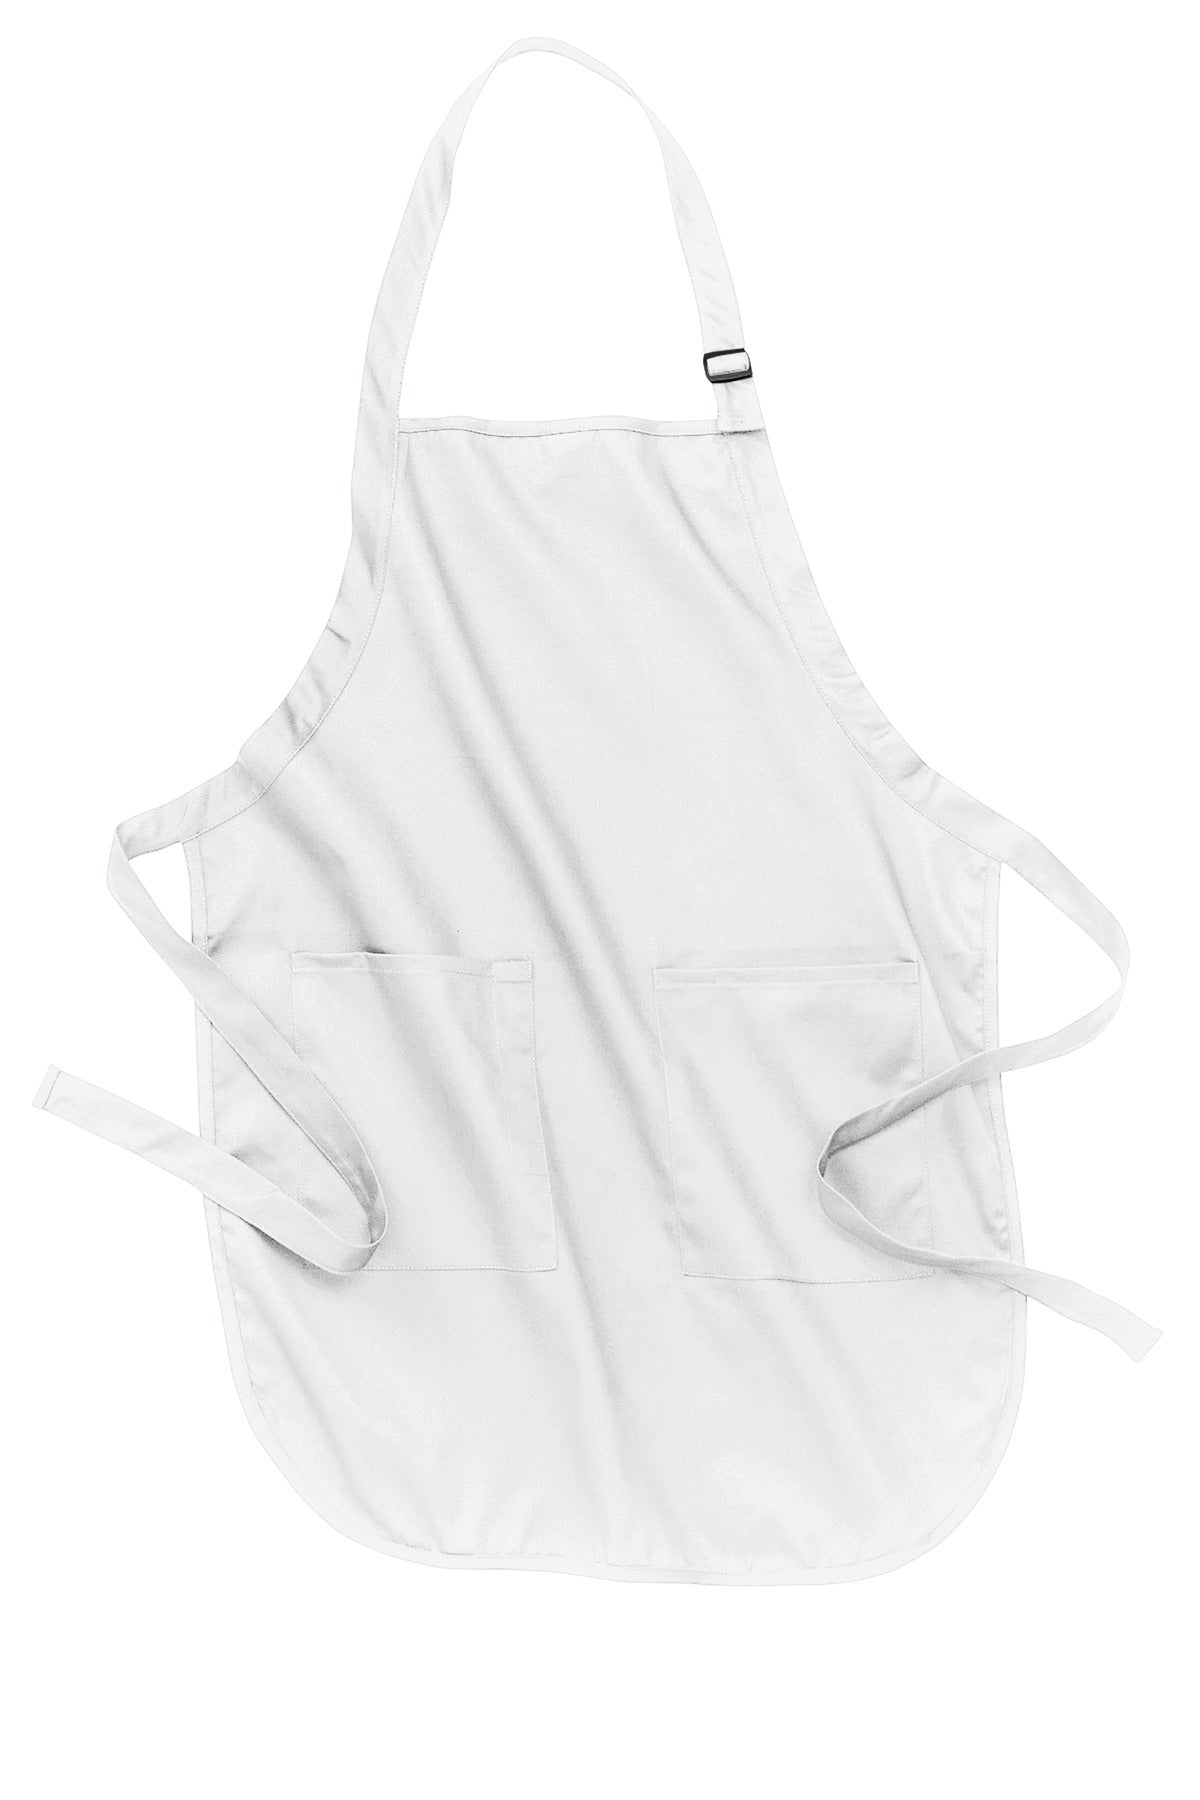 Port Authority Full-Length Apron with Pockets. A500